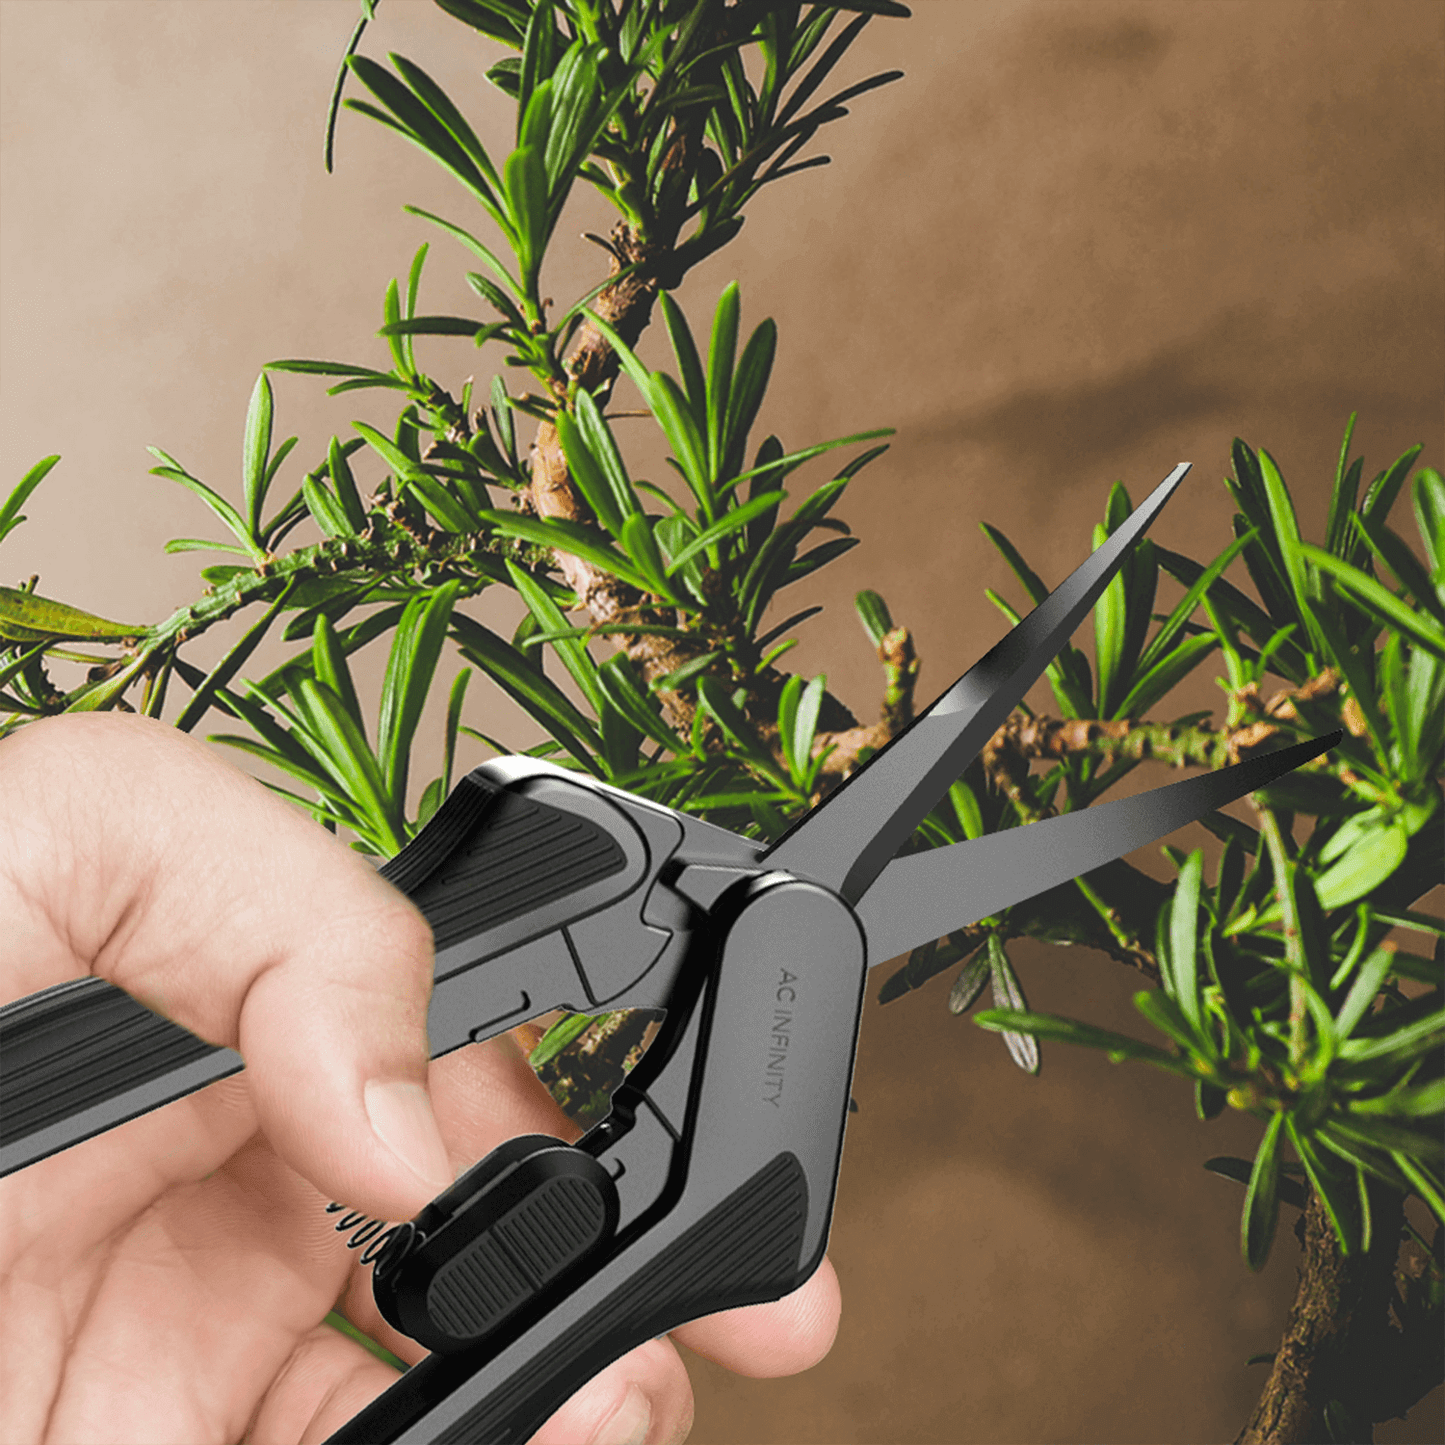 AC Infinity Stainless Steel Curved Pruning Shear, Ergonomic Lightweight, 6.6" Blades | AC-PSC3 | Grow Tents Depot | Harvest & Extraction | 819137023383